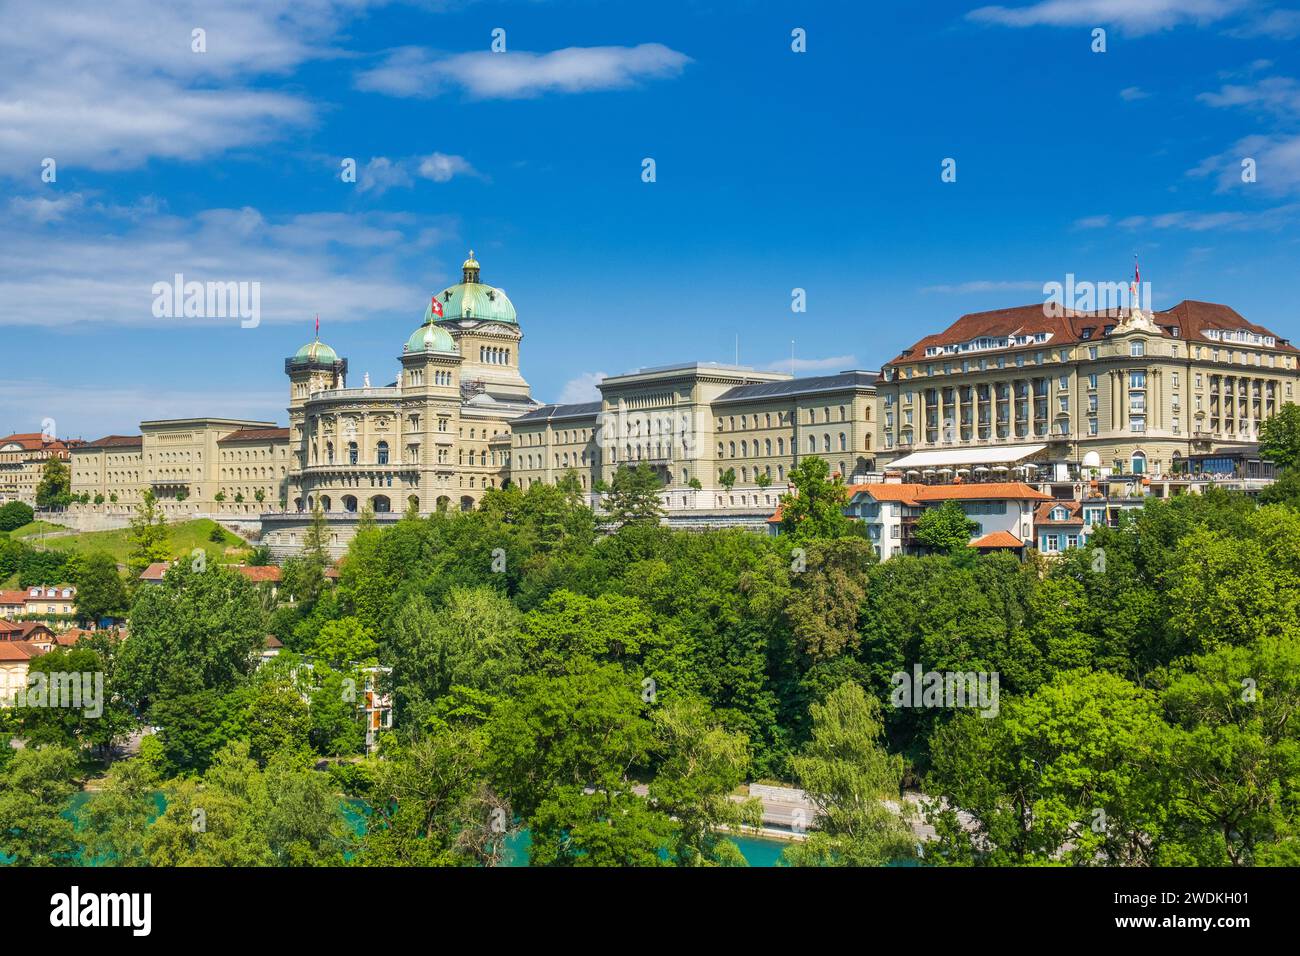 The Federal Palace or Swiss Federal Assembly and Council in Bern city in Switzerland Stock Photo